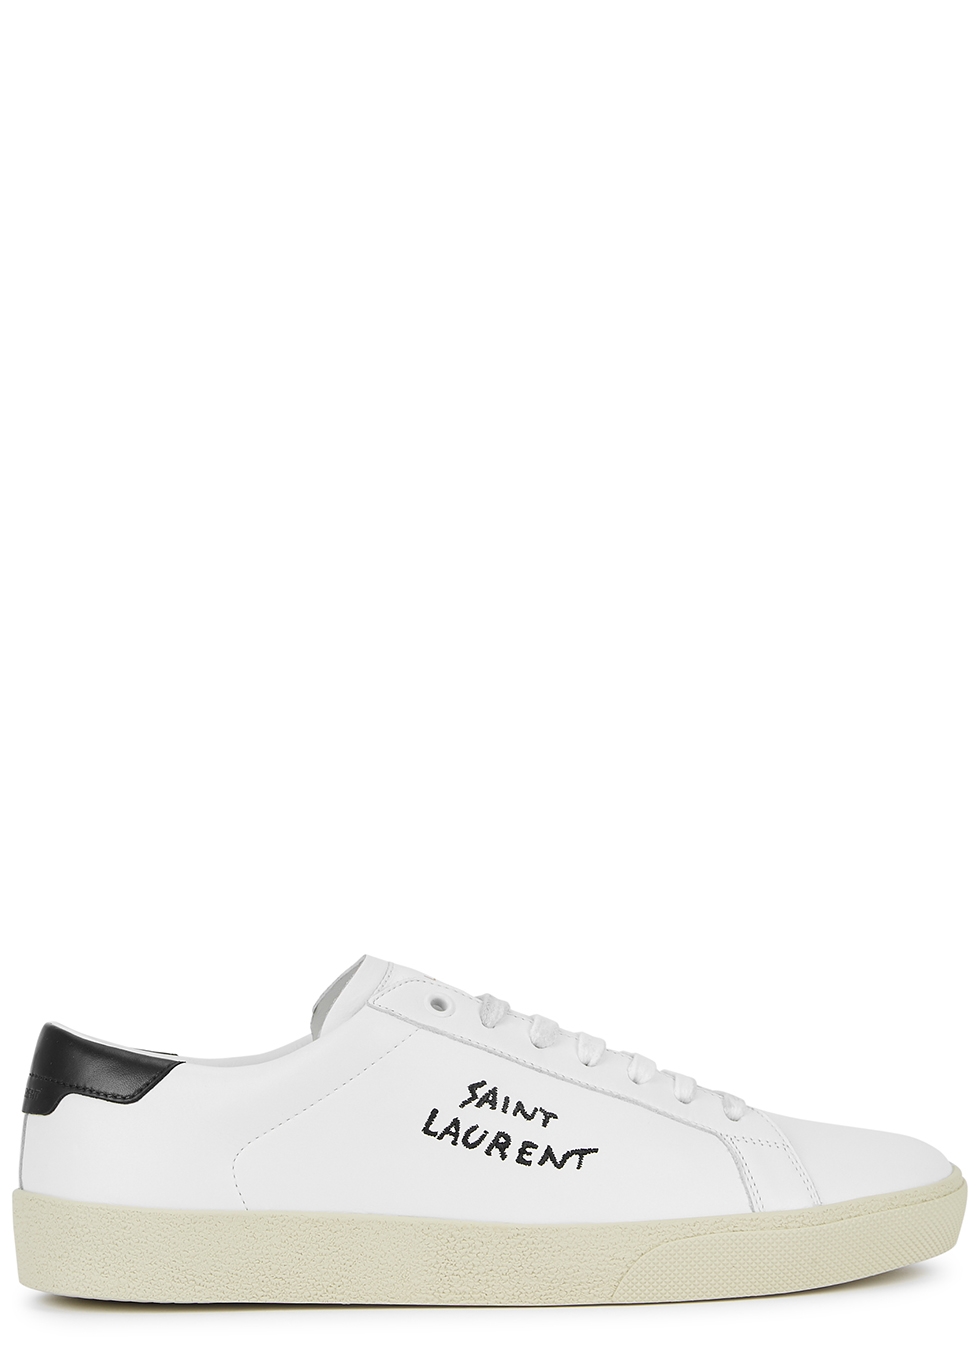 ysl leather sneakers